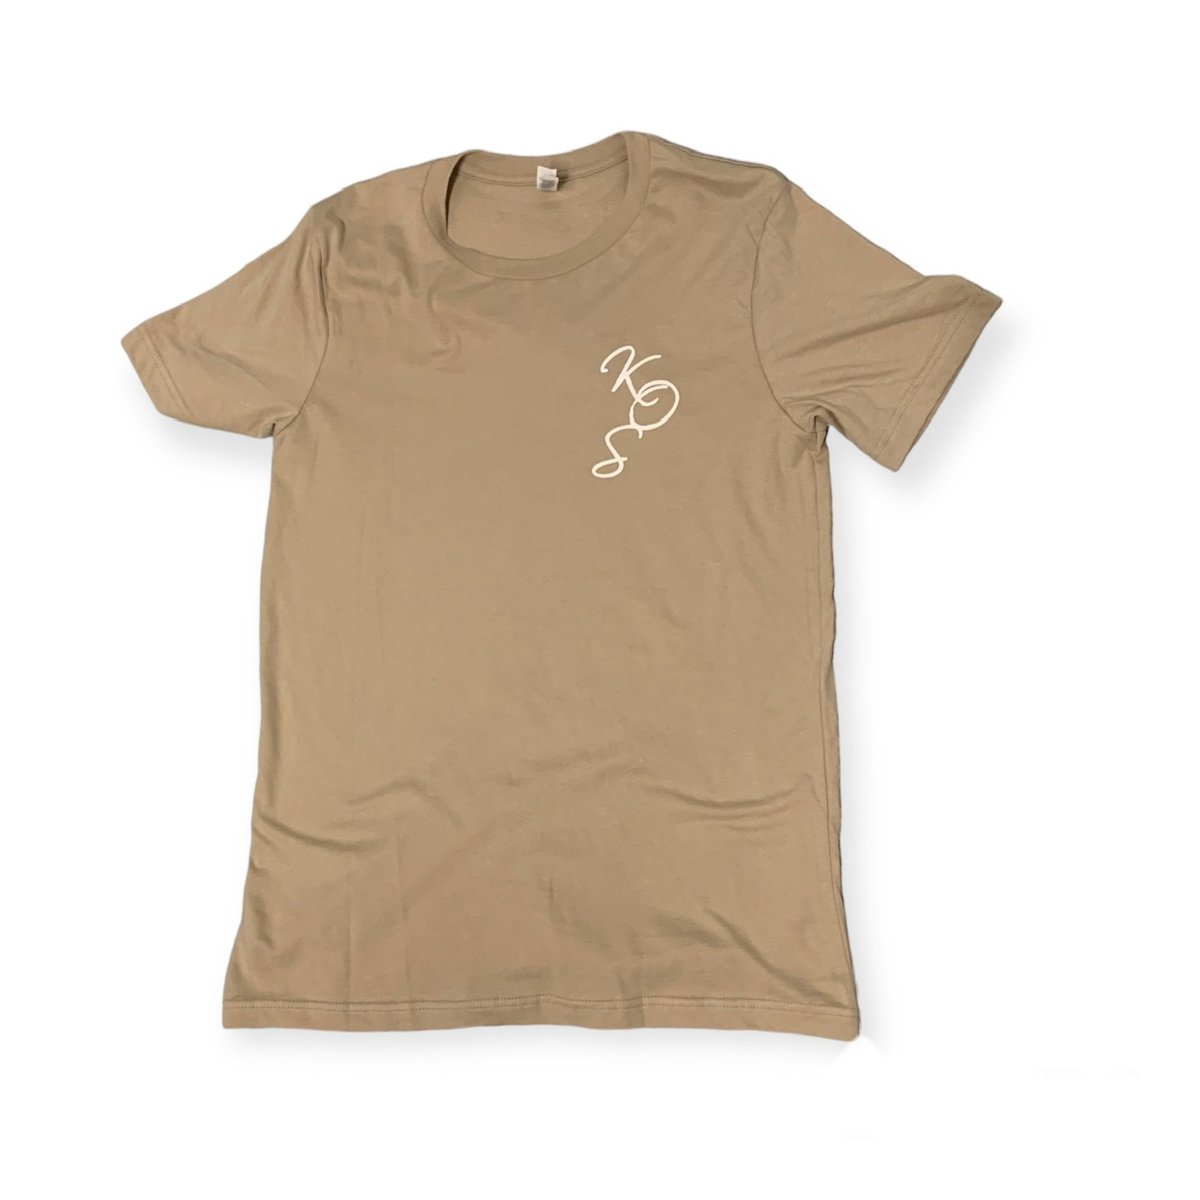 Image of The Sunday Service Tee (Tan)